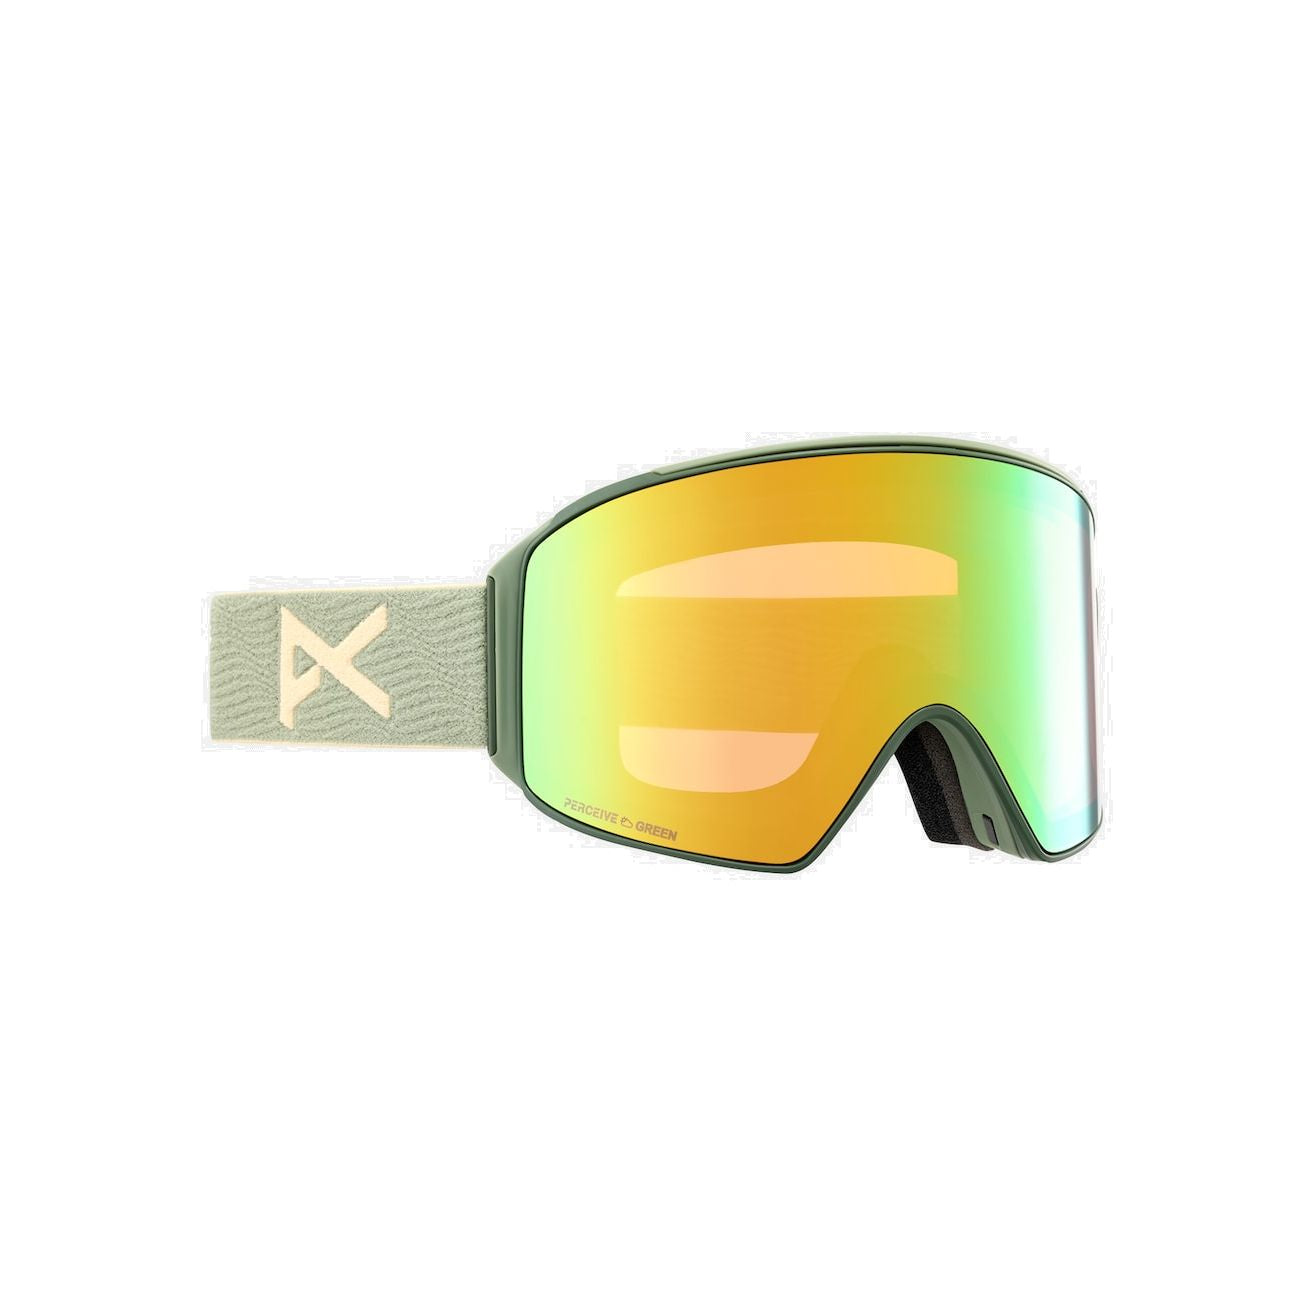 Anon M4 Cylindrical Goggles + Bonus Lens + MFI Face Mask - Low Bridge Fit Hedge / Perceive Variable Green Snow Goggles